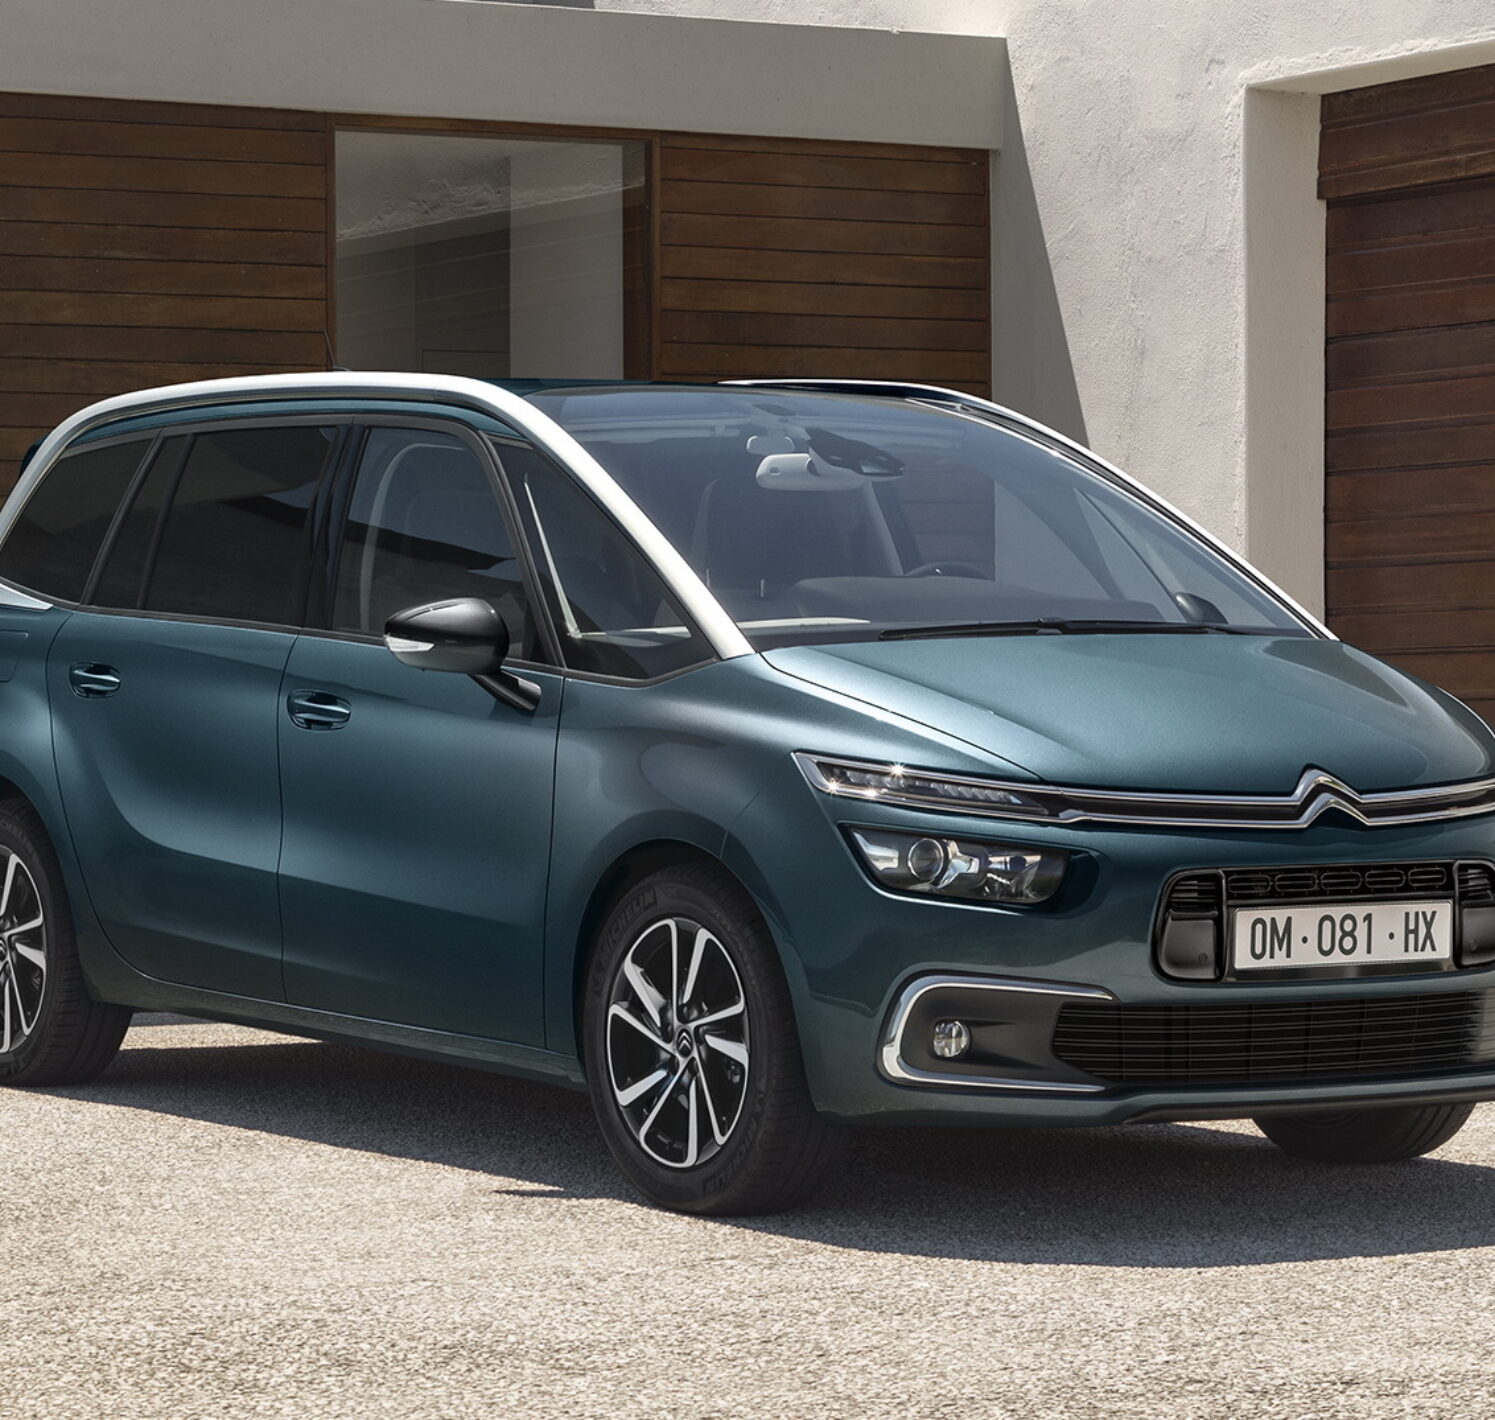 https://autofilter.sk/assets/images/grand-c4-spacetourer/gallery/citroen-grand-c4-spacetourer-discontinued-as-carmaker-ends-mpv-era-after-nearly-30-years-186974_1.jpeg - obrazok